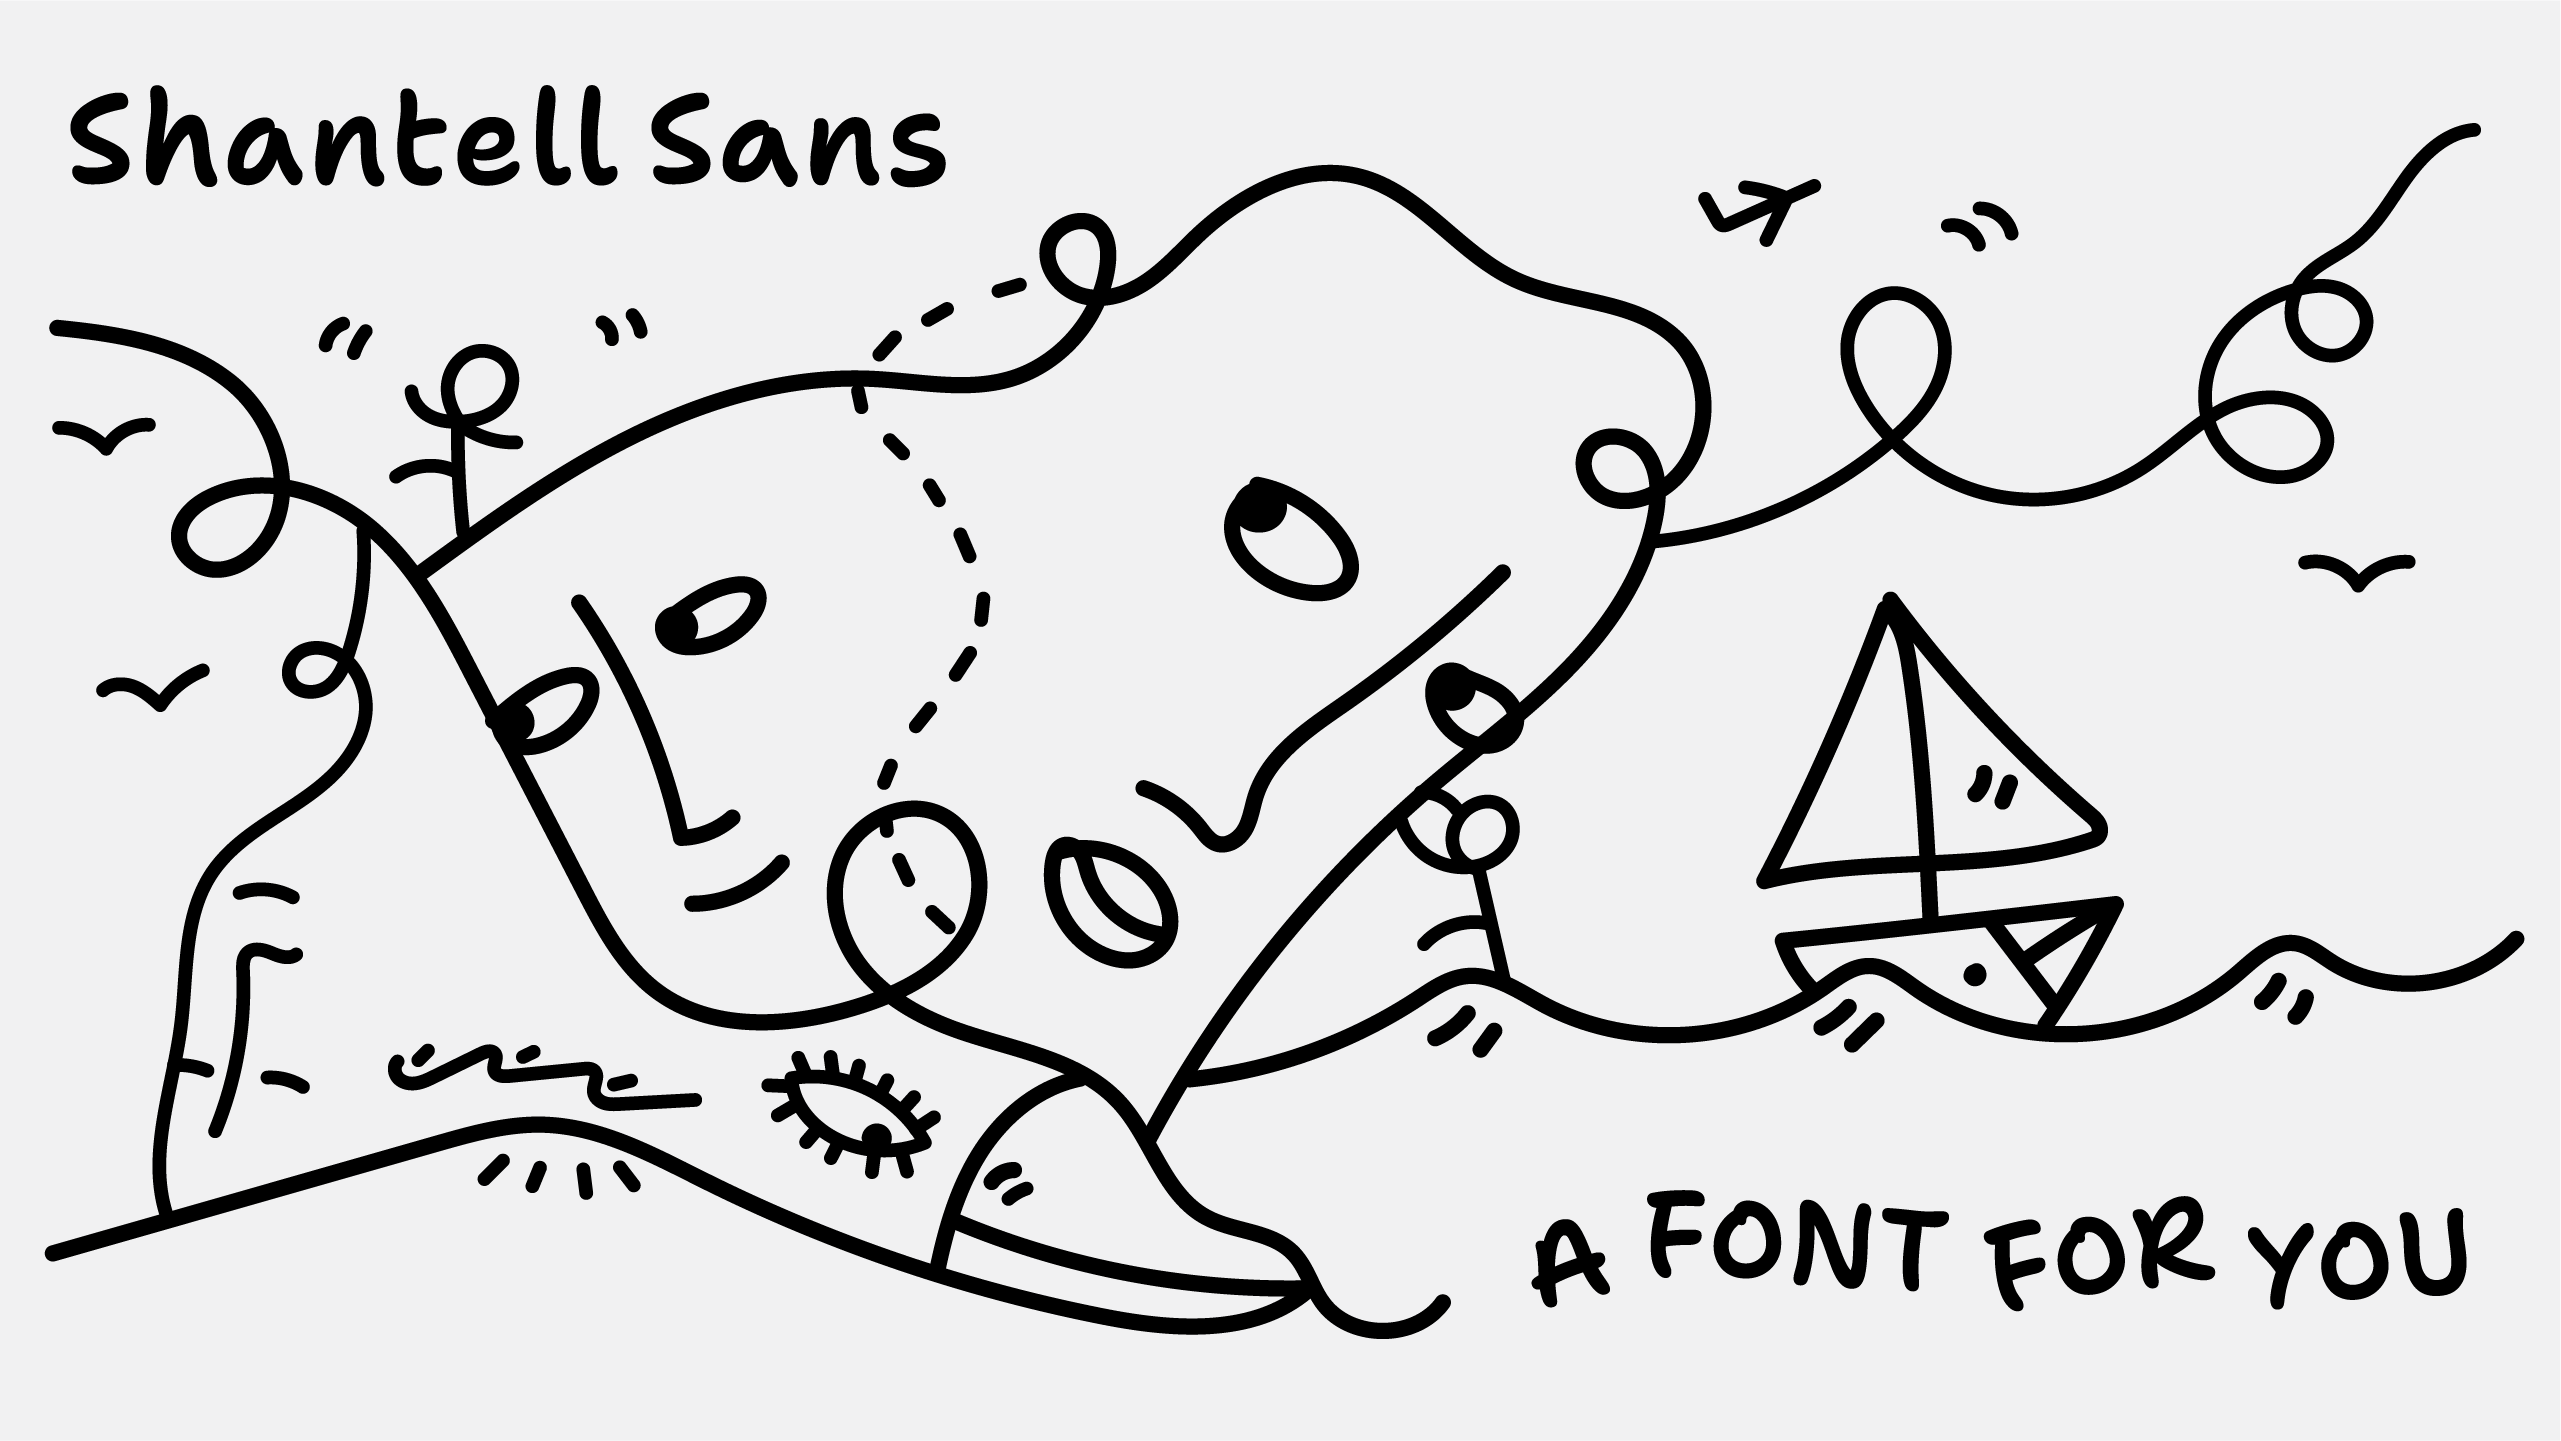 Shantell Sans with Shantell Martin artwork, calling it ”A font for you”